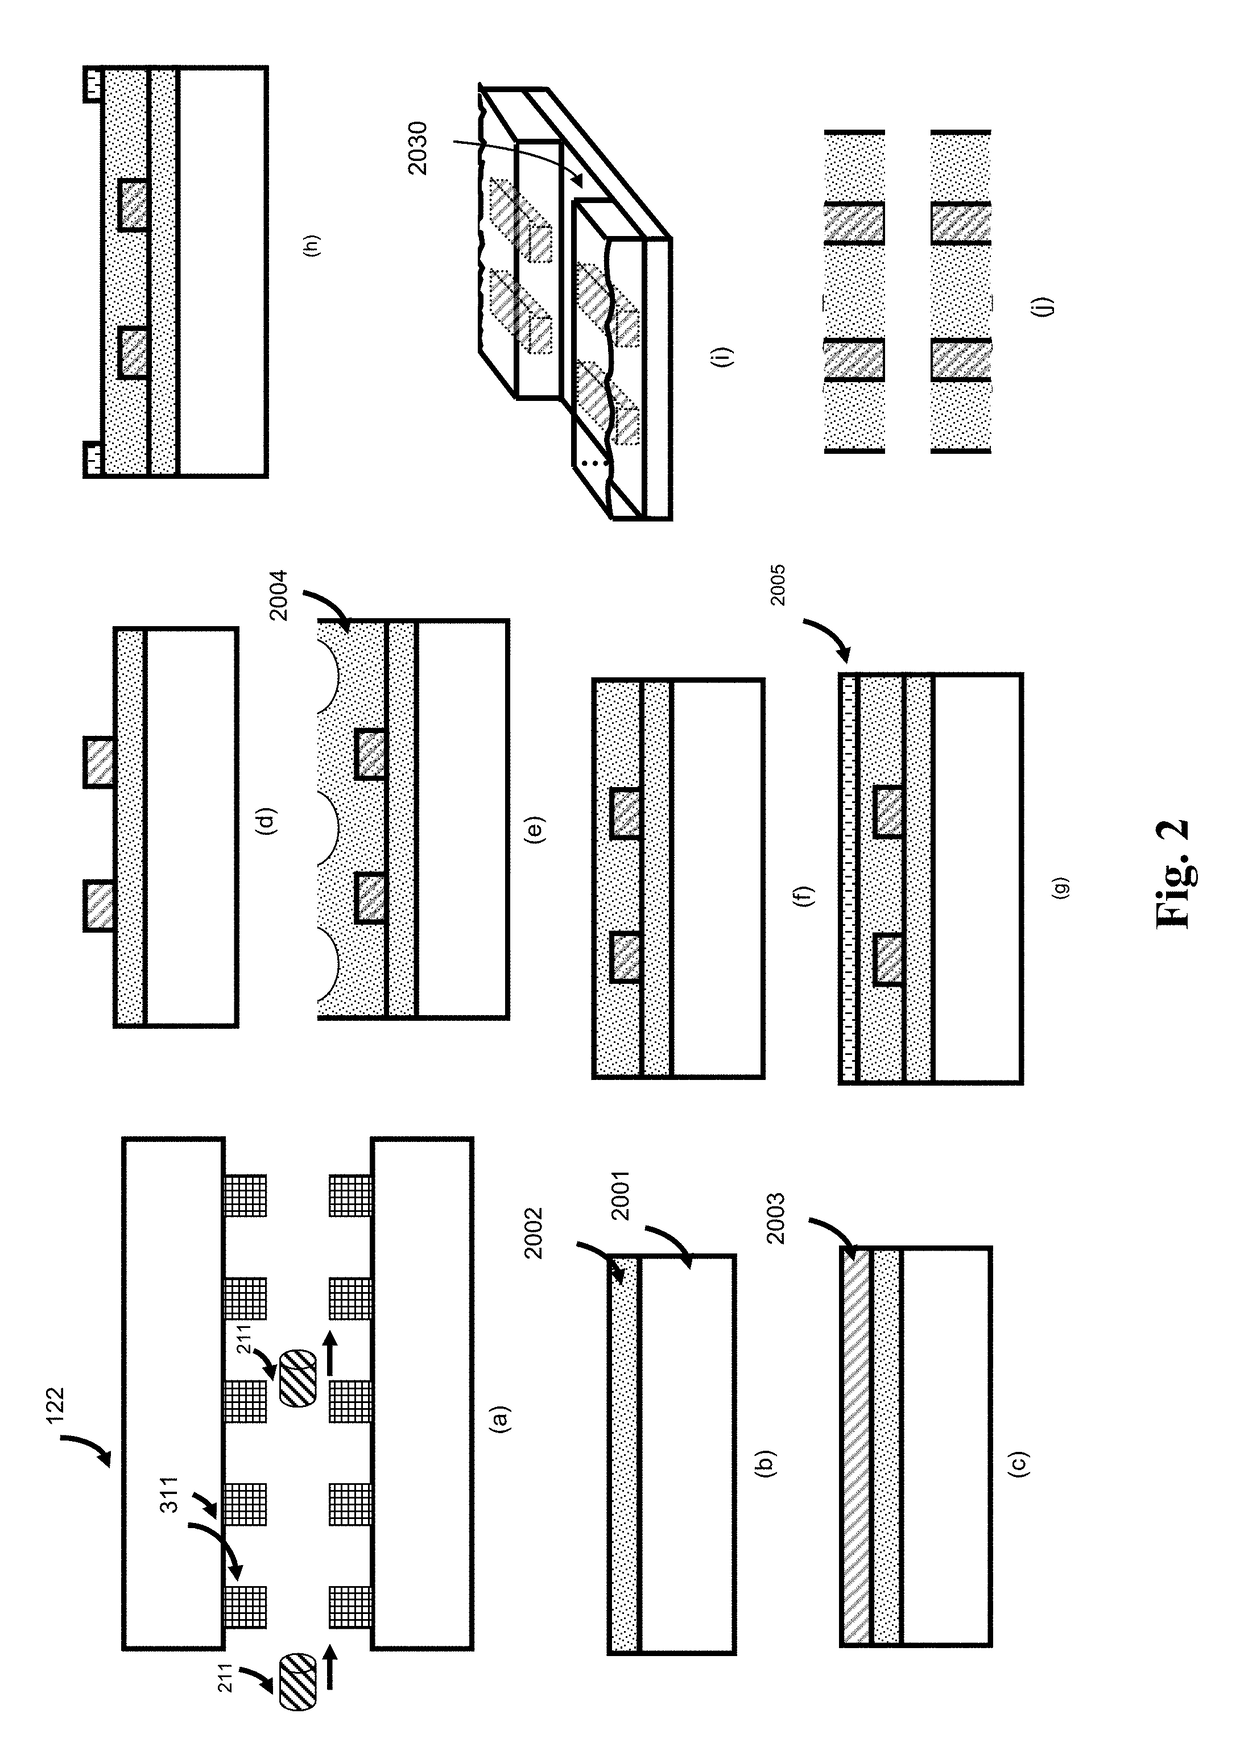 Apparatus and methods for disease detection